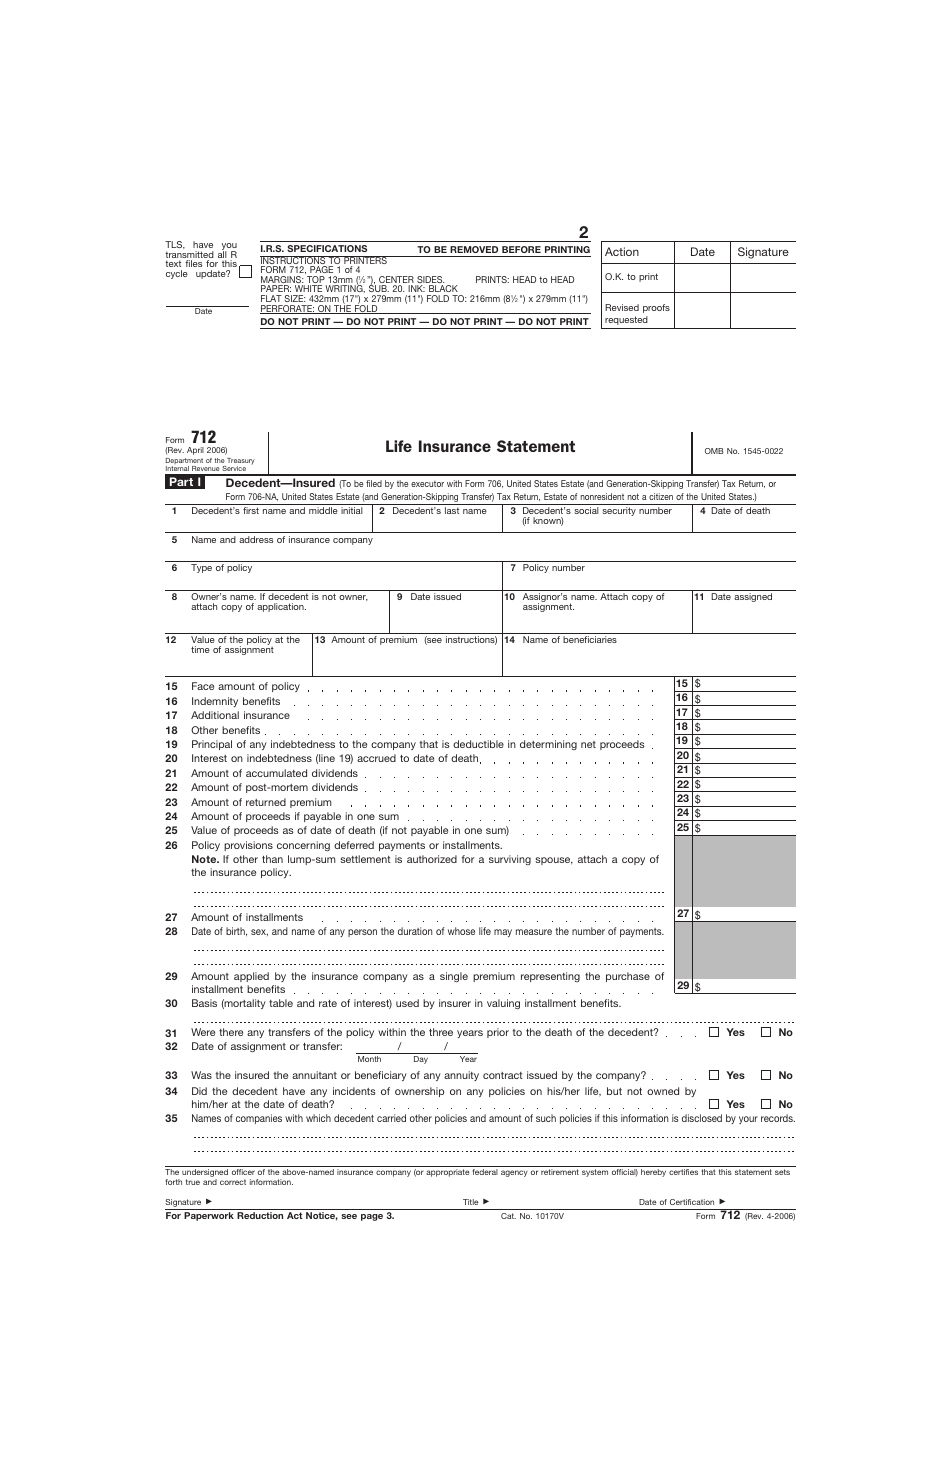 IRS Form 712 Life Insurance Statement, Page 1